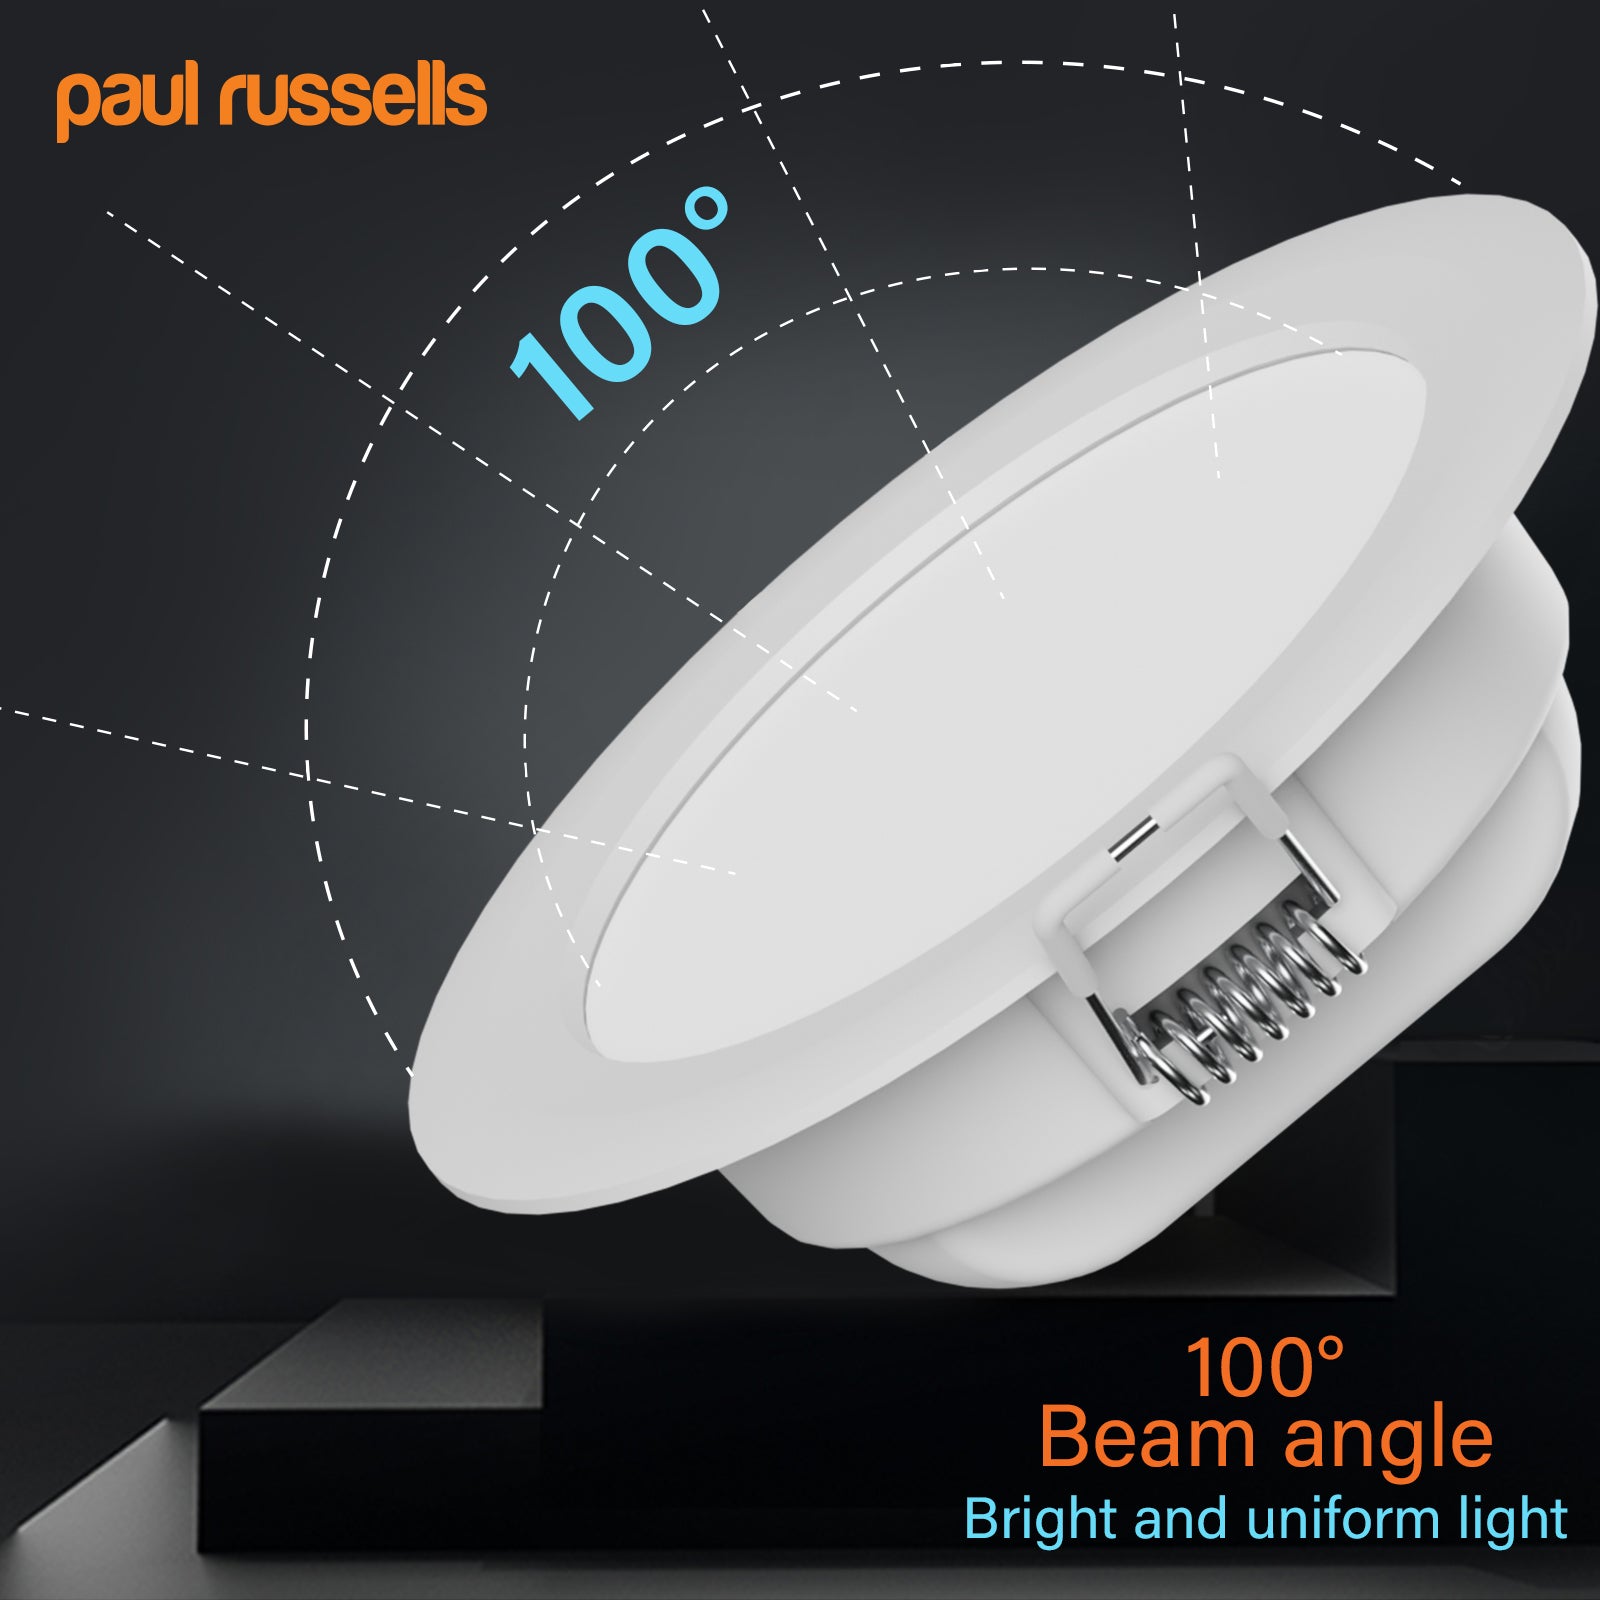 6W, LED Round Ceiling Downlights, 550 Lumens, 6500K Day Light, Non-Dimmable Panel Spotlights